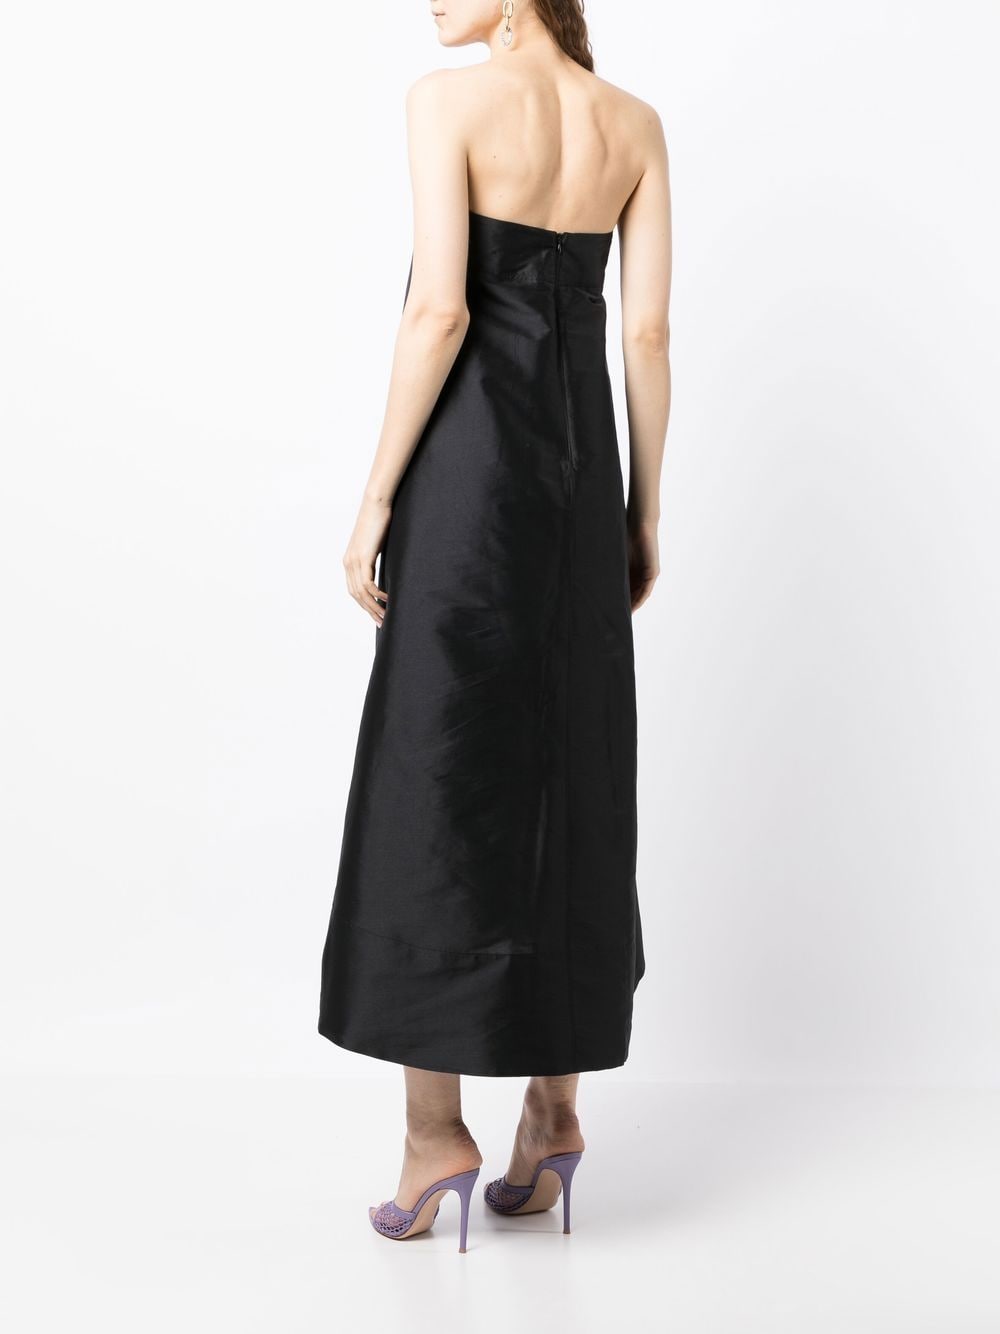 Shop Manning Cartell Kinetic Abstractions Strapless Dress In Black